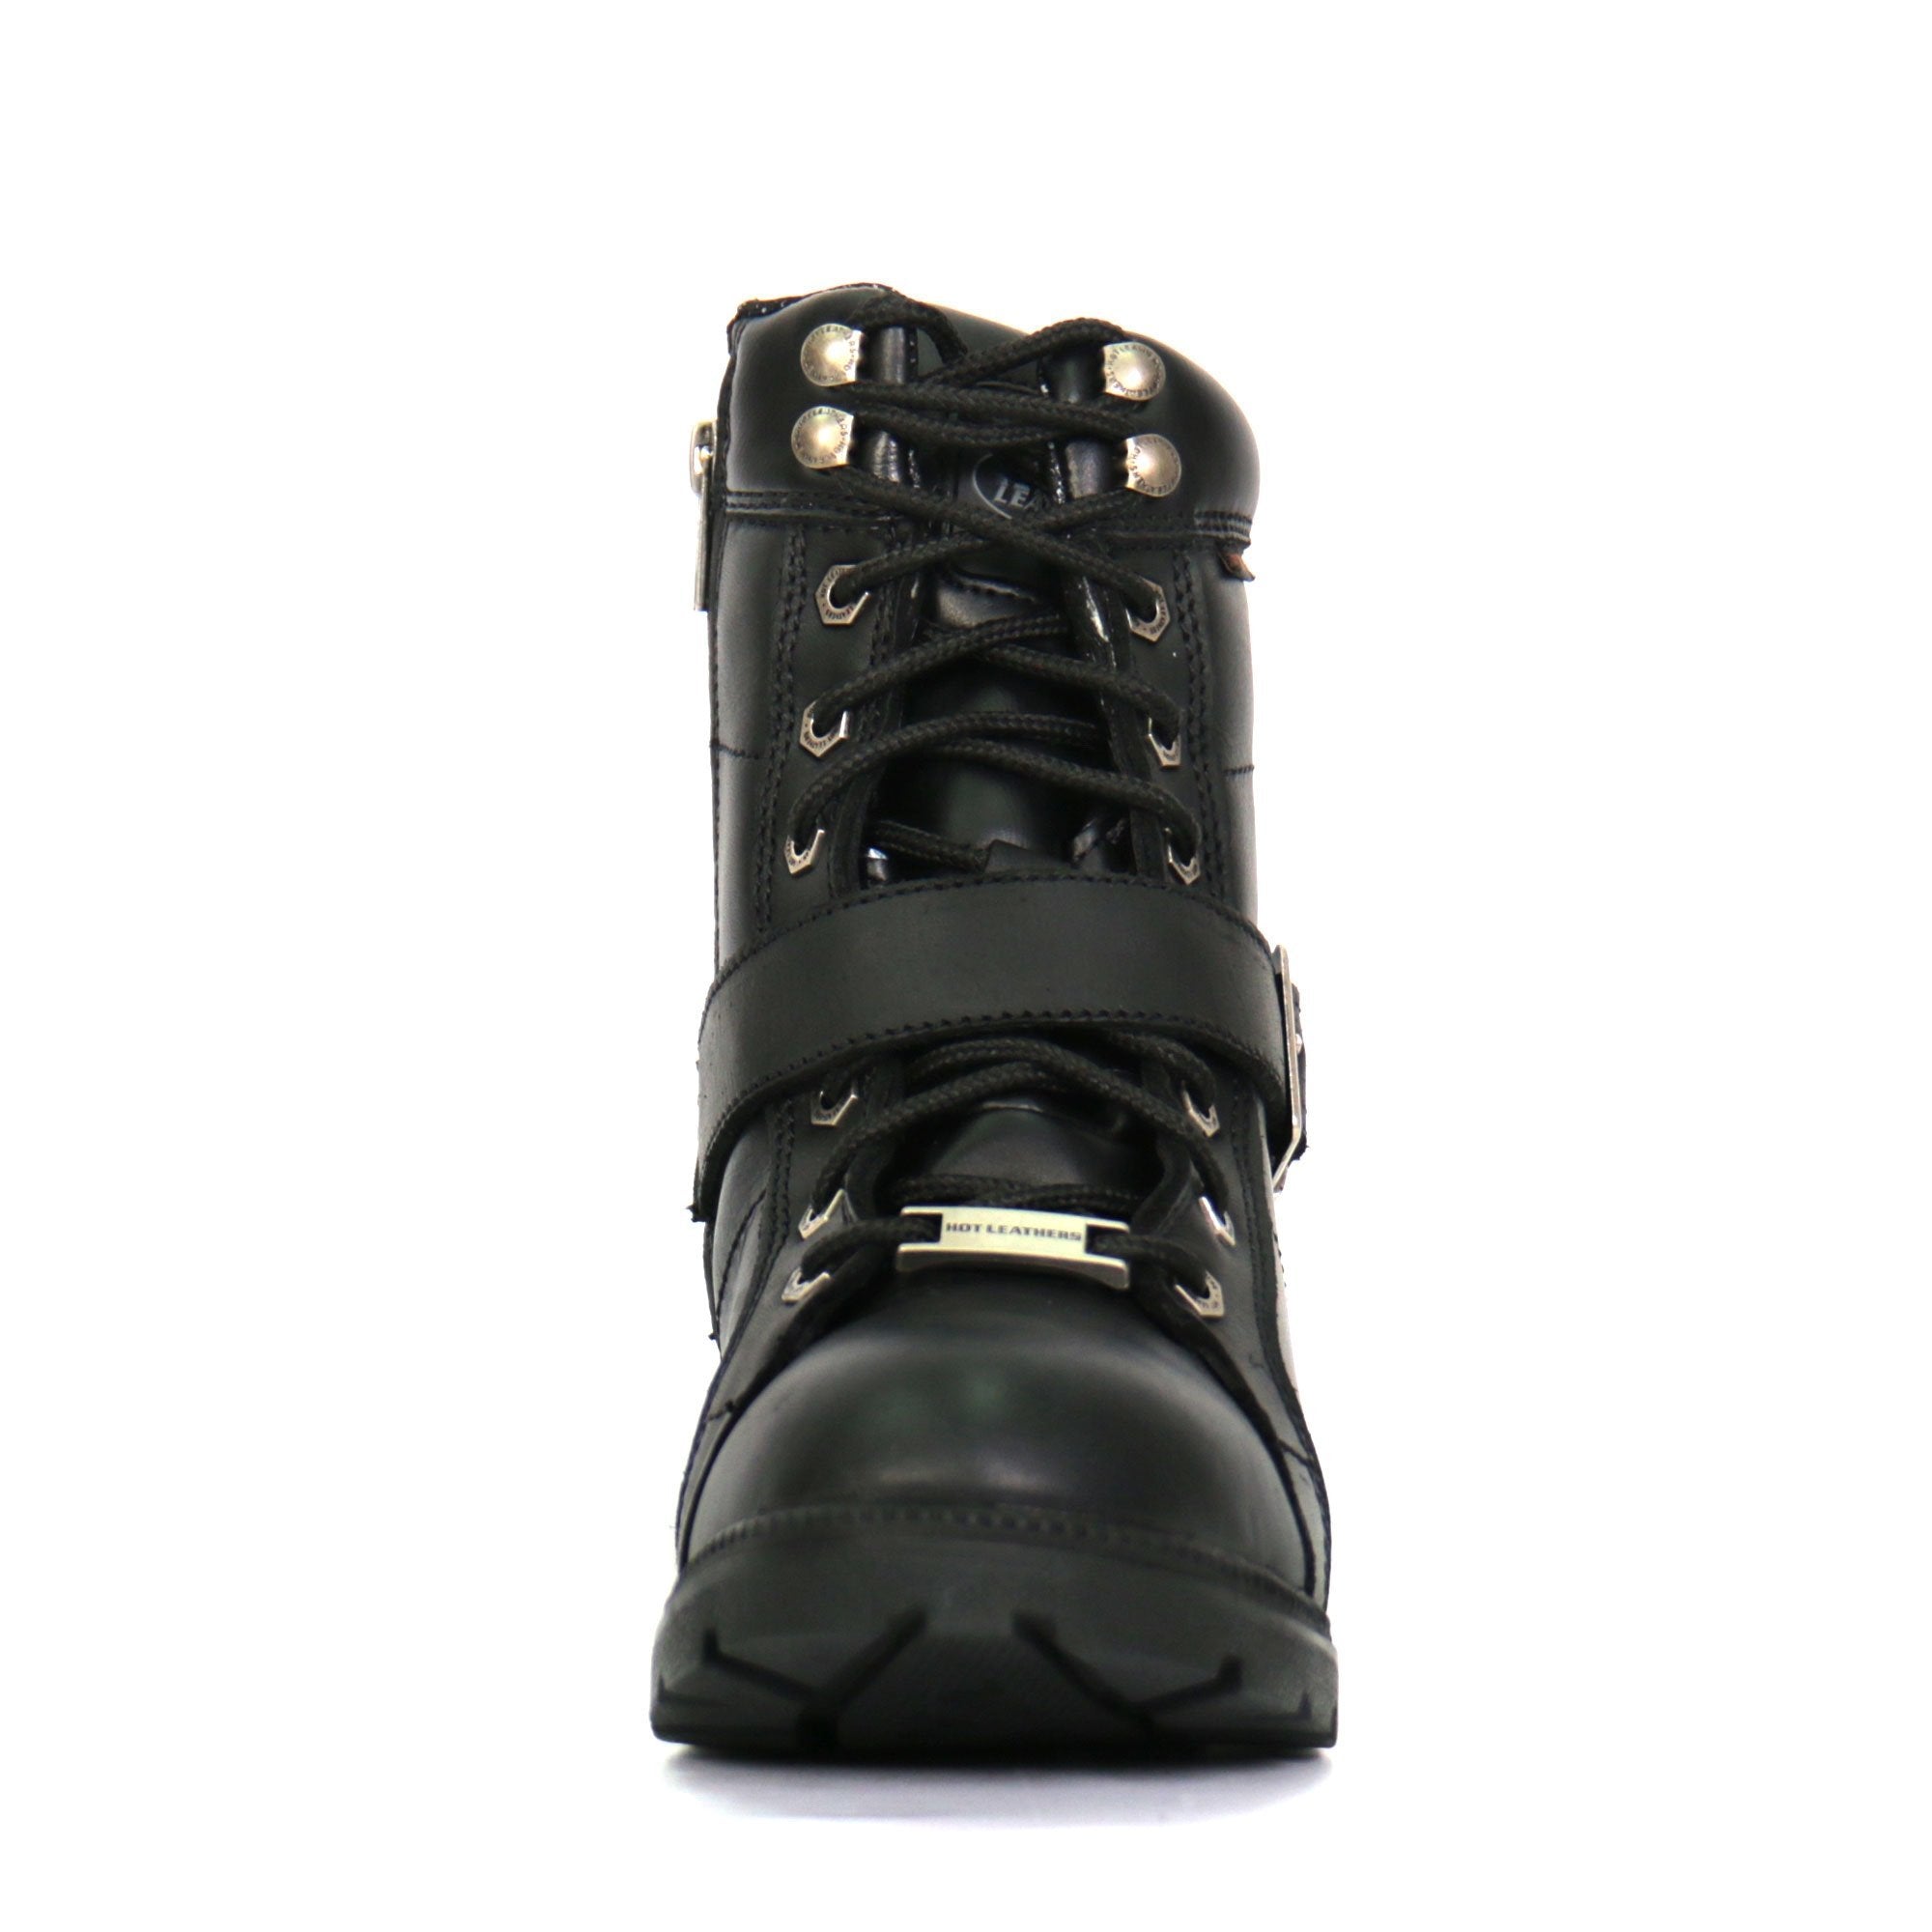 Hot Leathers Ladies 6-inch Black Lace-Up Leather Boots with Buckle Strap BTL1004